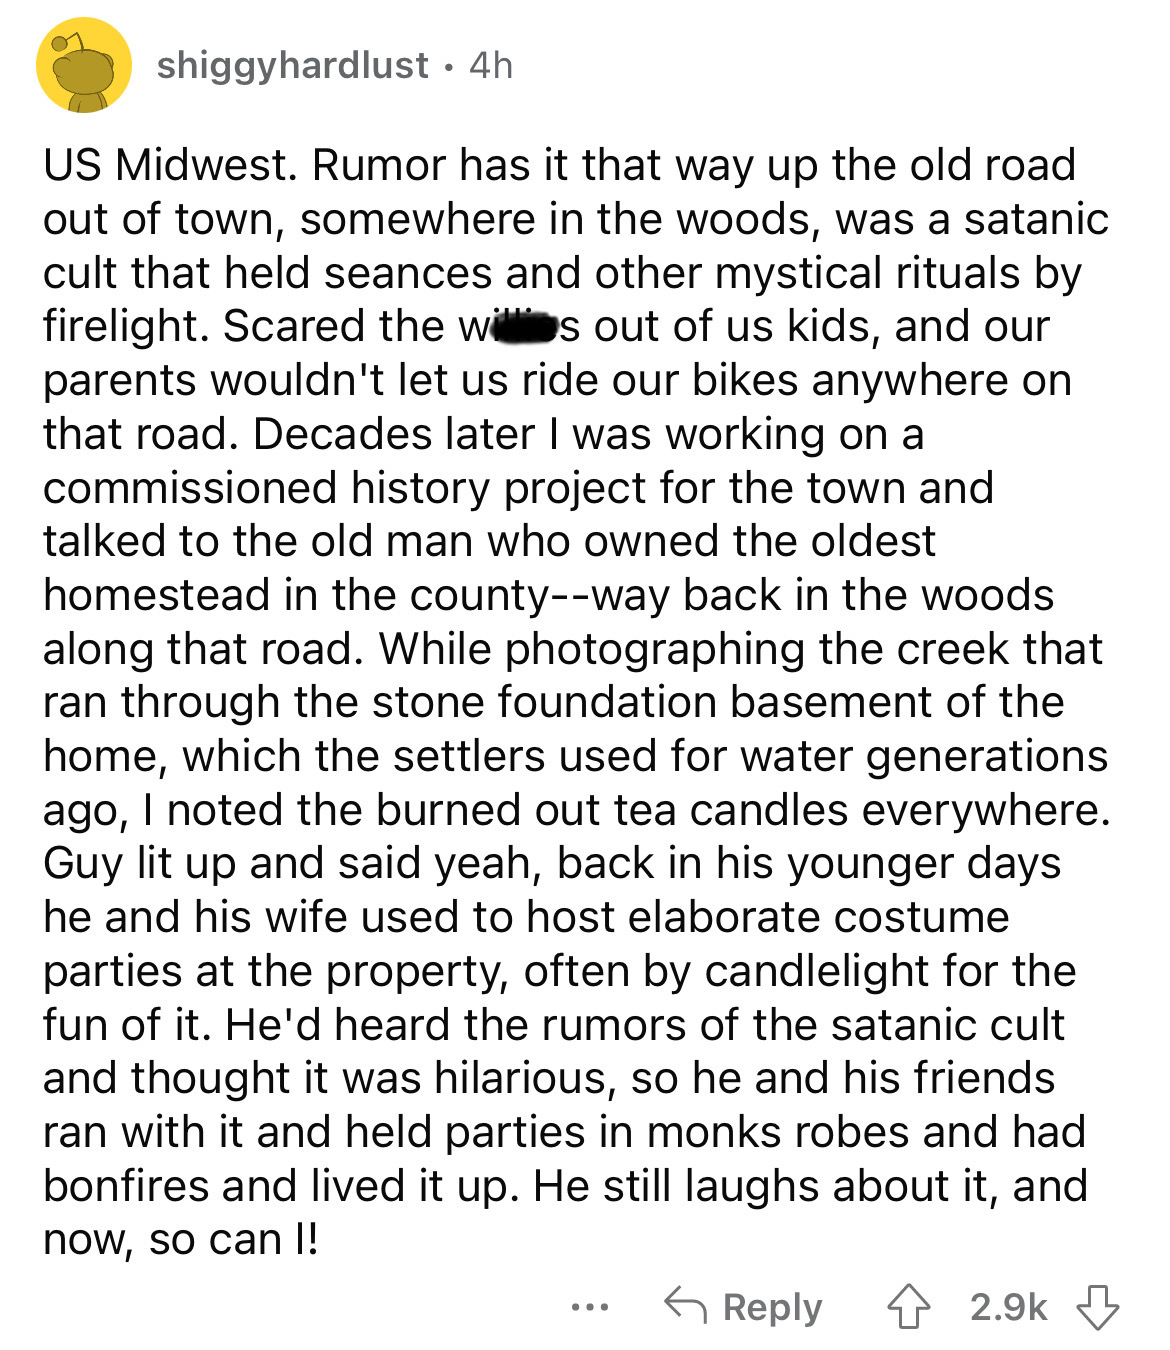 document - shiggyhardlust 4h Us Midwest. Rumor has it that way up the old road out of town, somewhere in the woods, was a satanic cult that held seances and other mystical rituals by firelight. Scared the wis out of us kids, and our parents wouldn't let u